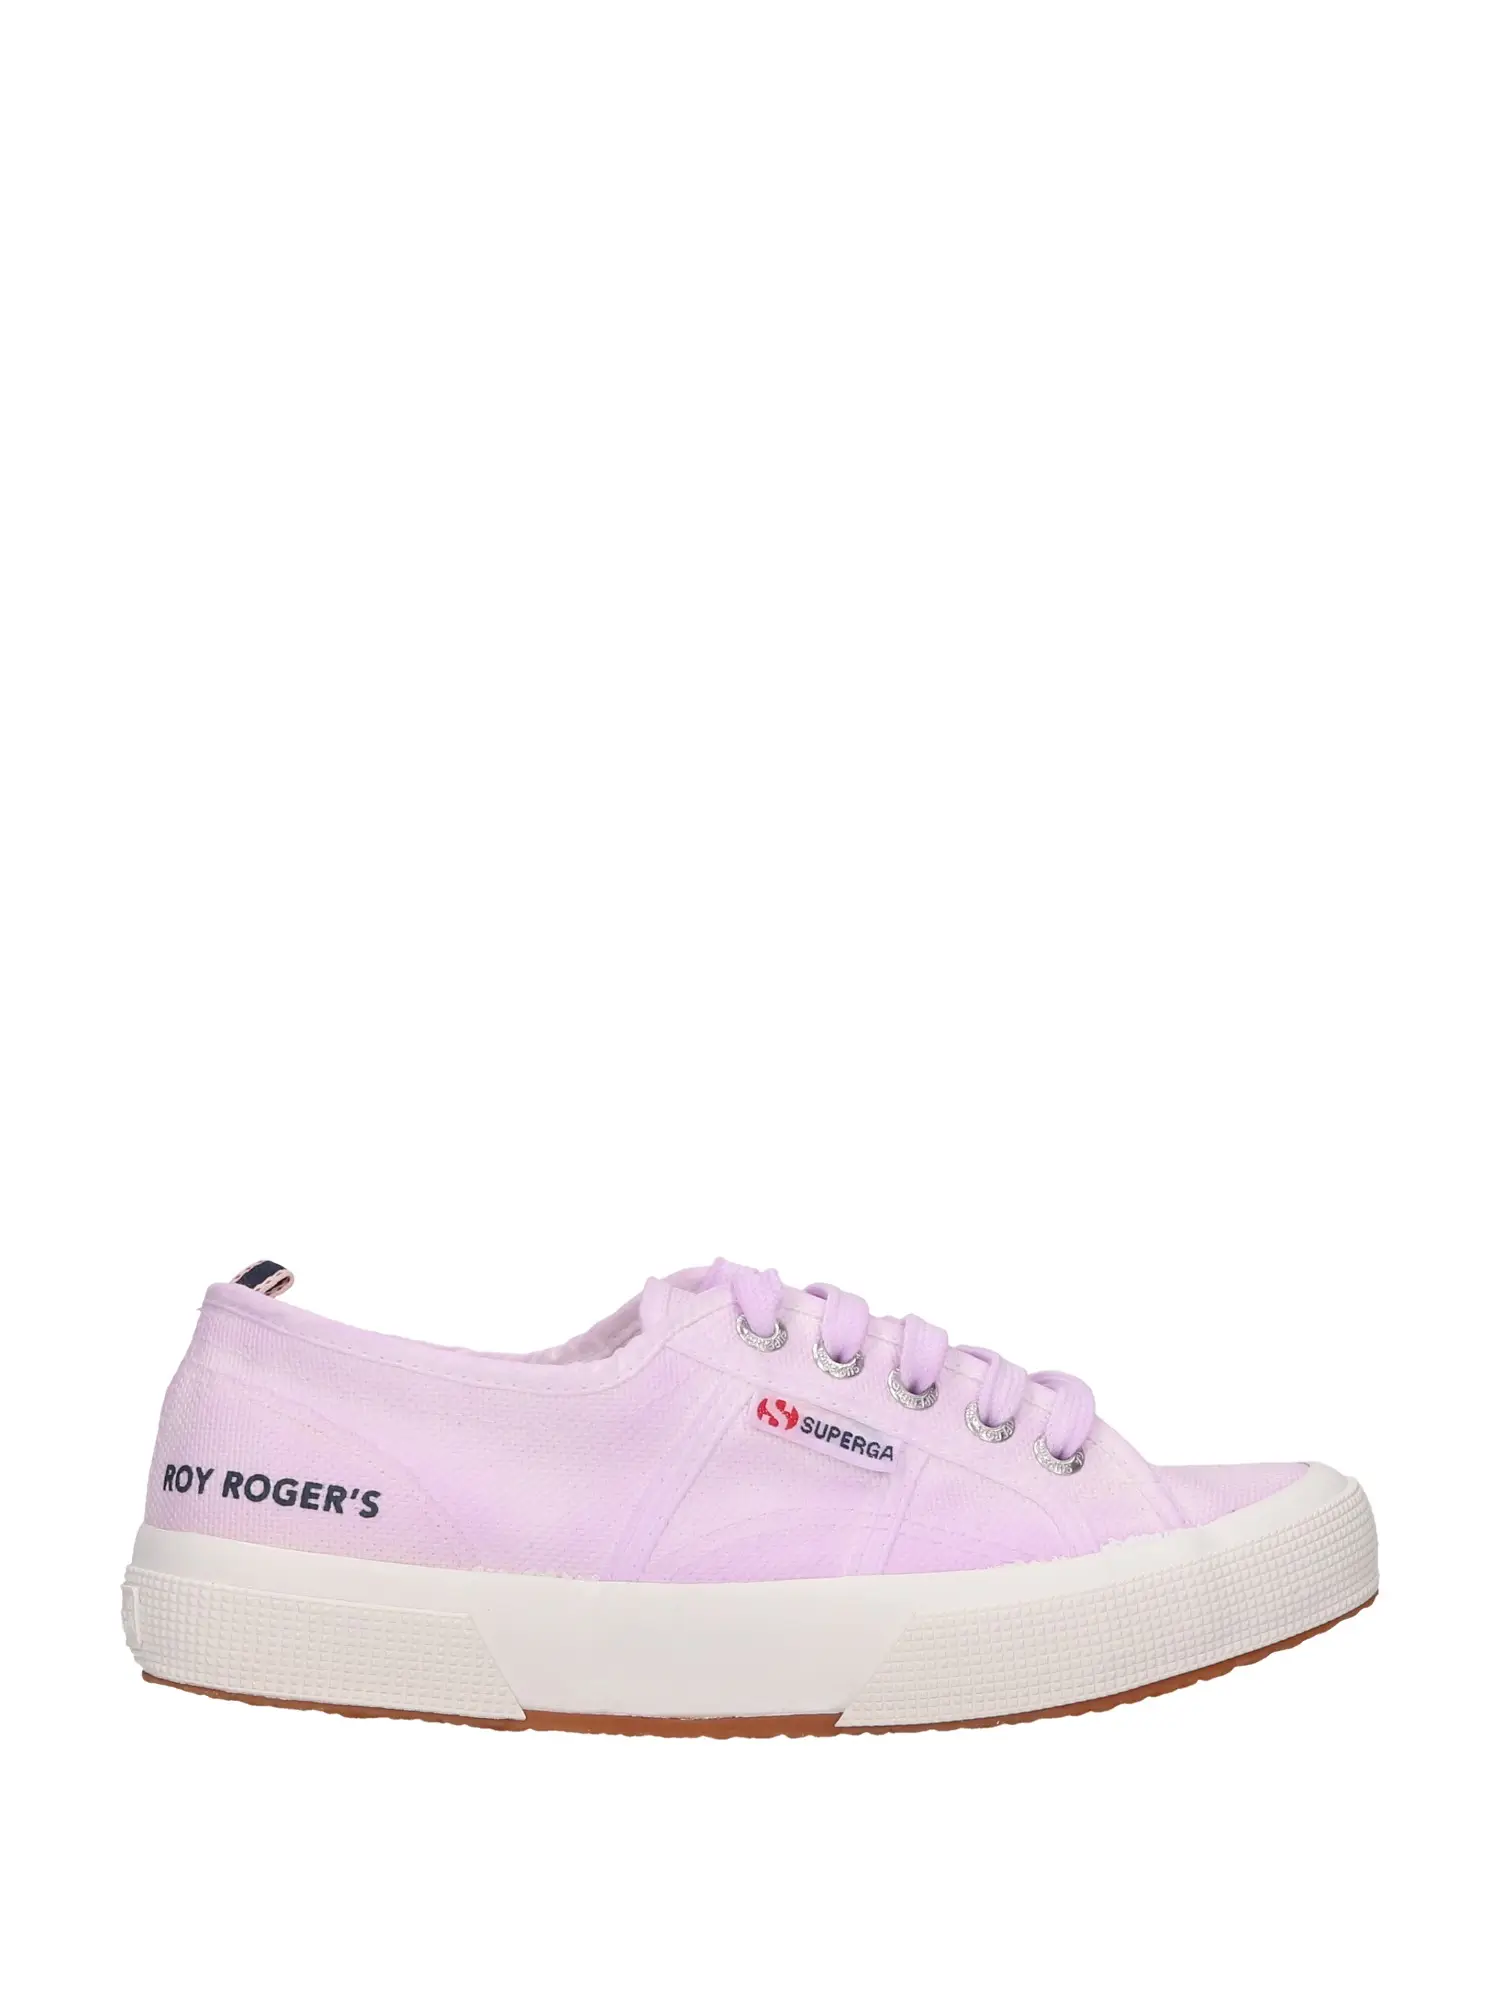 SNEAKERS DONNA - SUPERGA X ROY ROGER'S - S3137HW - LILLA, 38